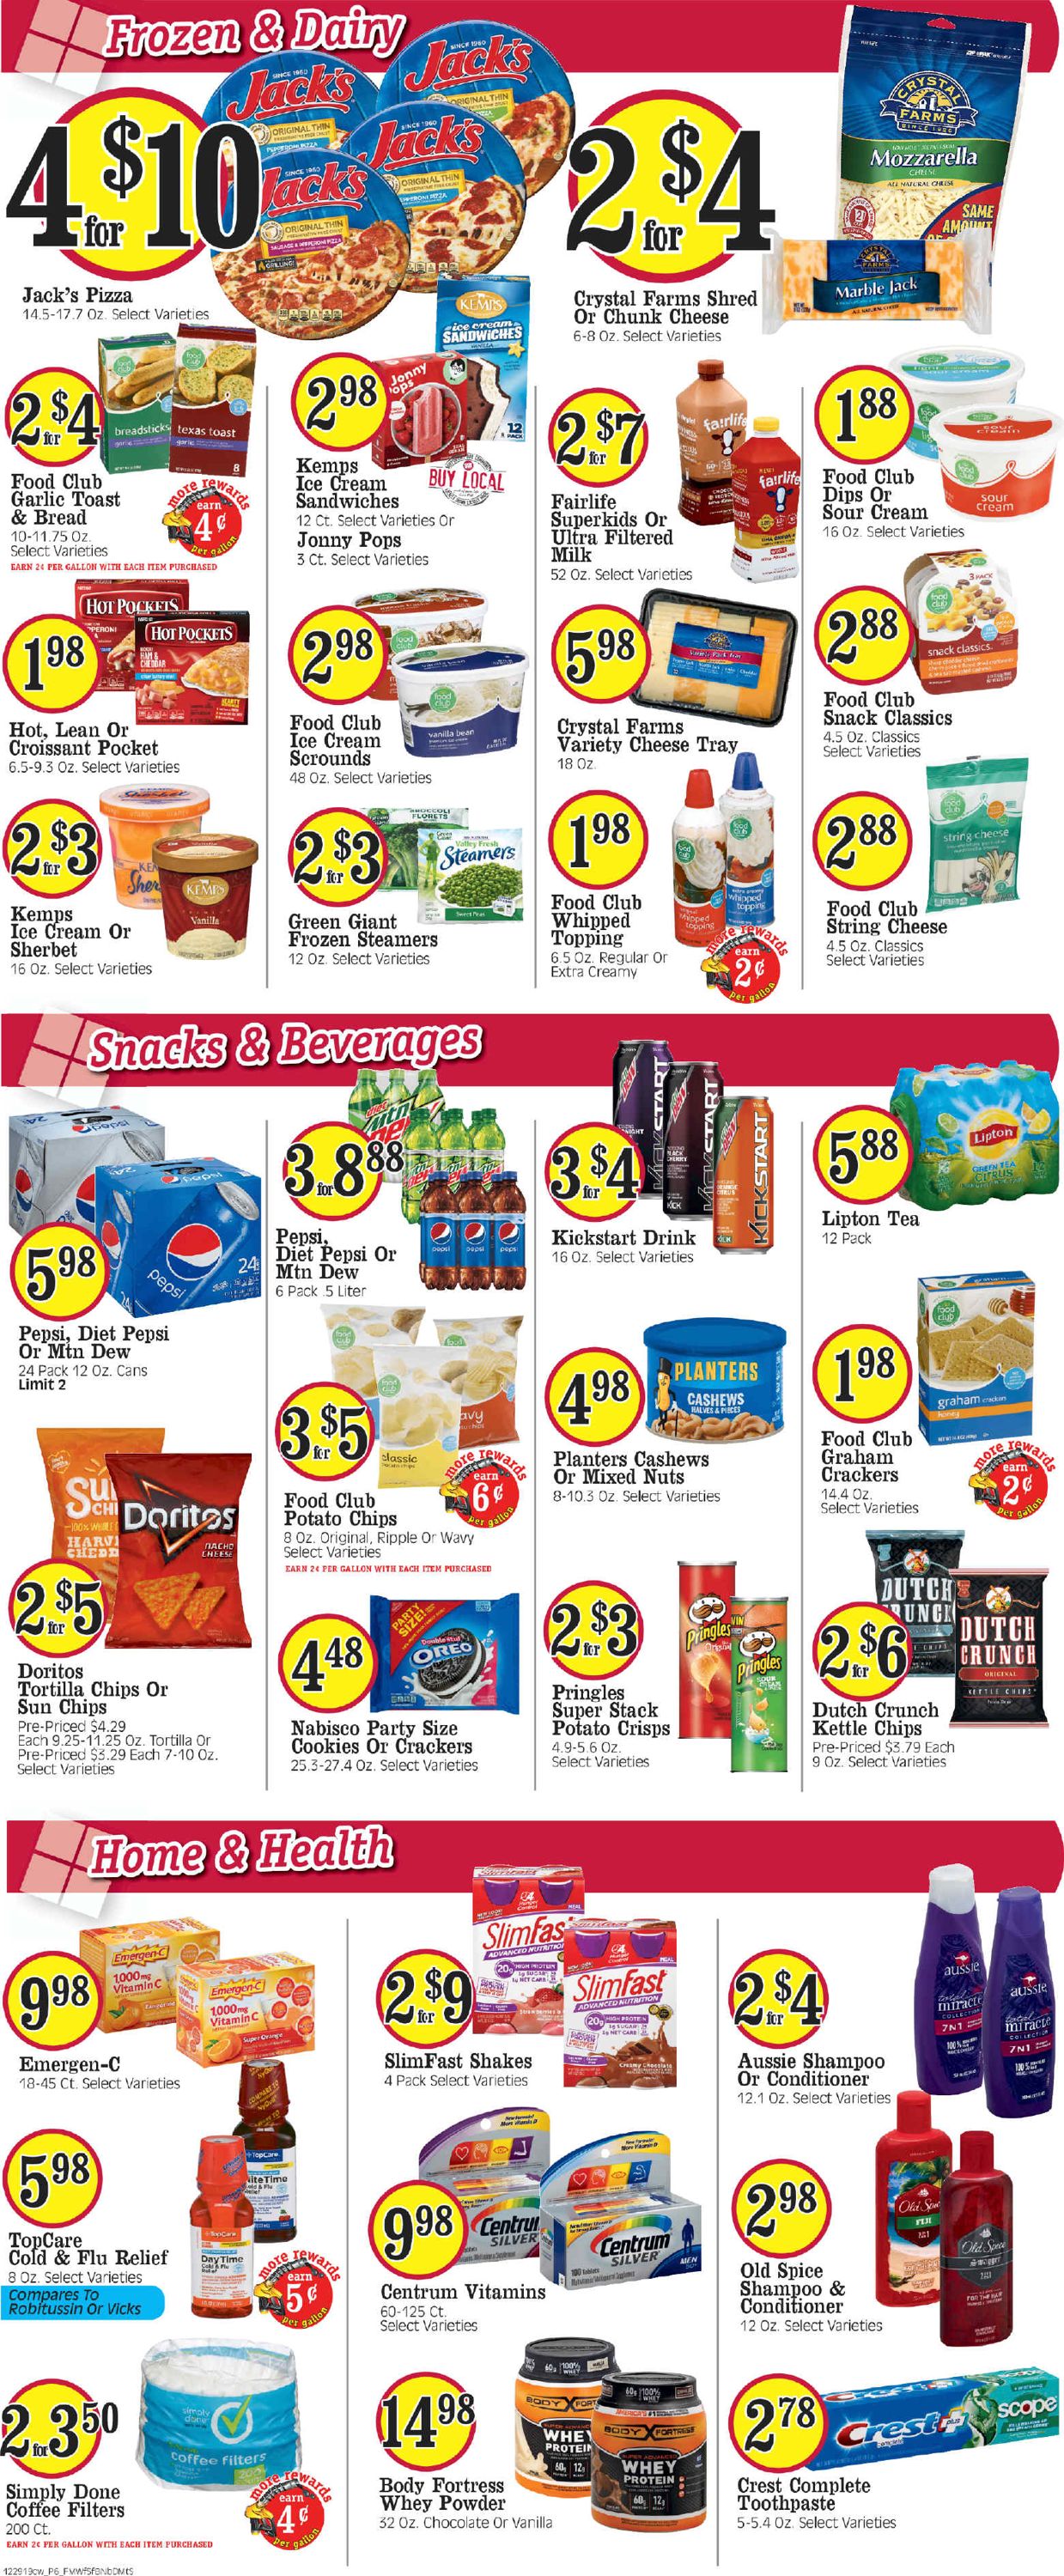 Cash Wise Weekly Ad Circular - valid 01/01-01/07/2020 (Page 6)